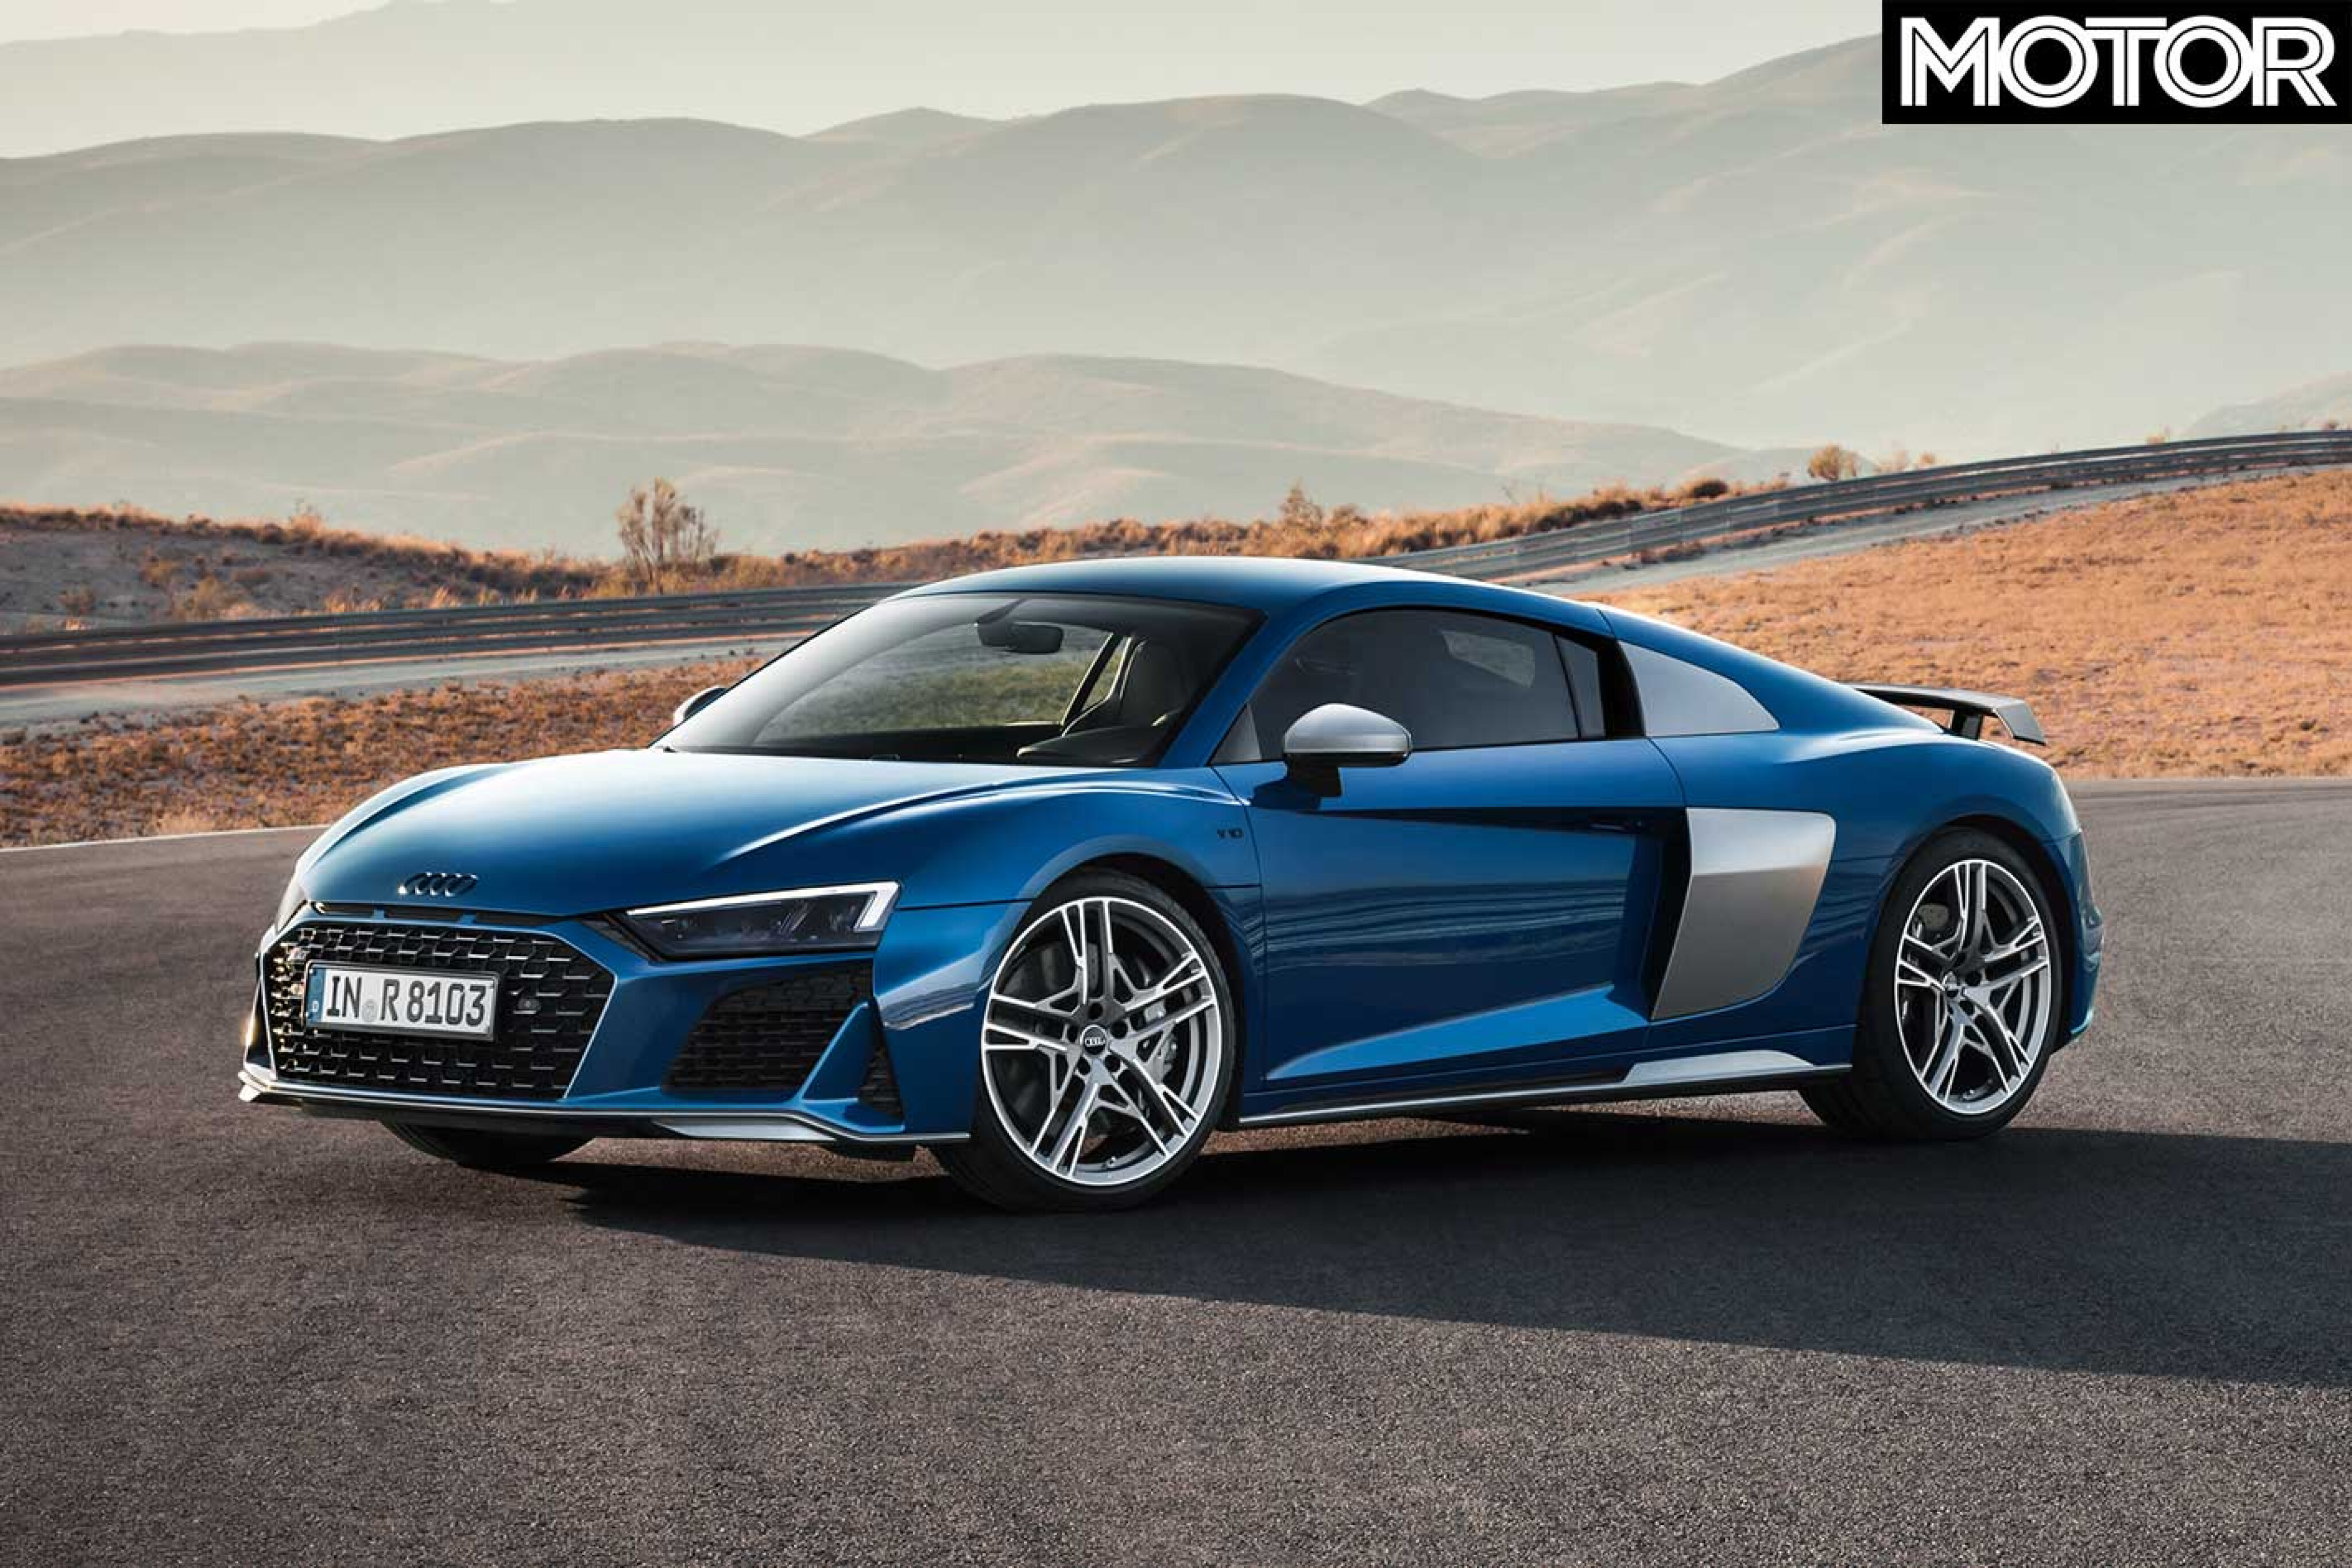 Why the Audi R8 was killed off in Australia